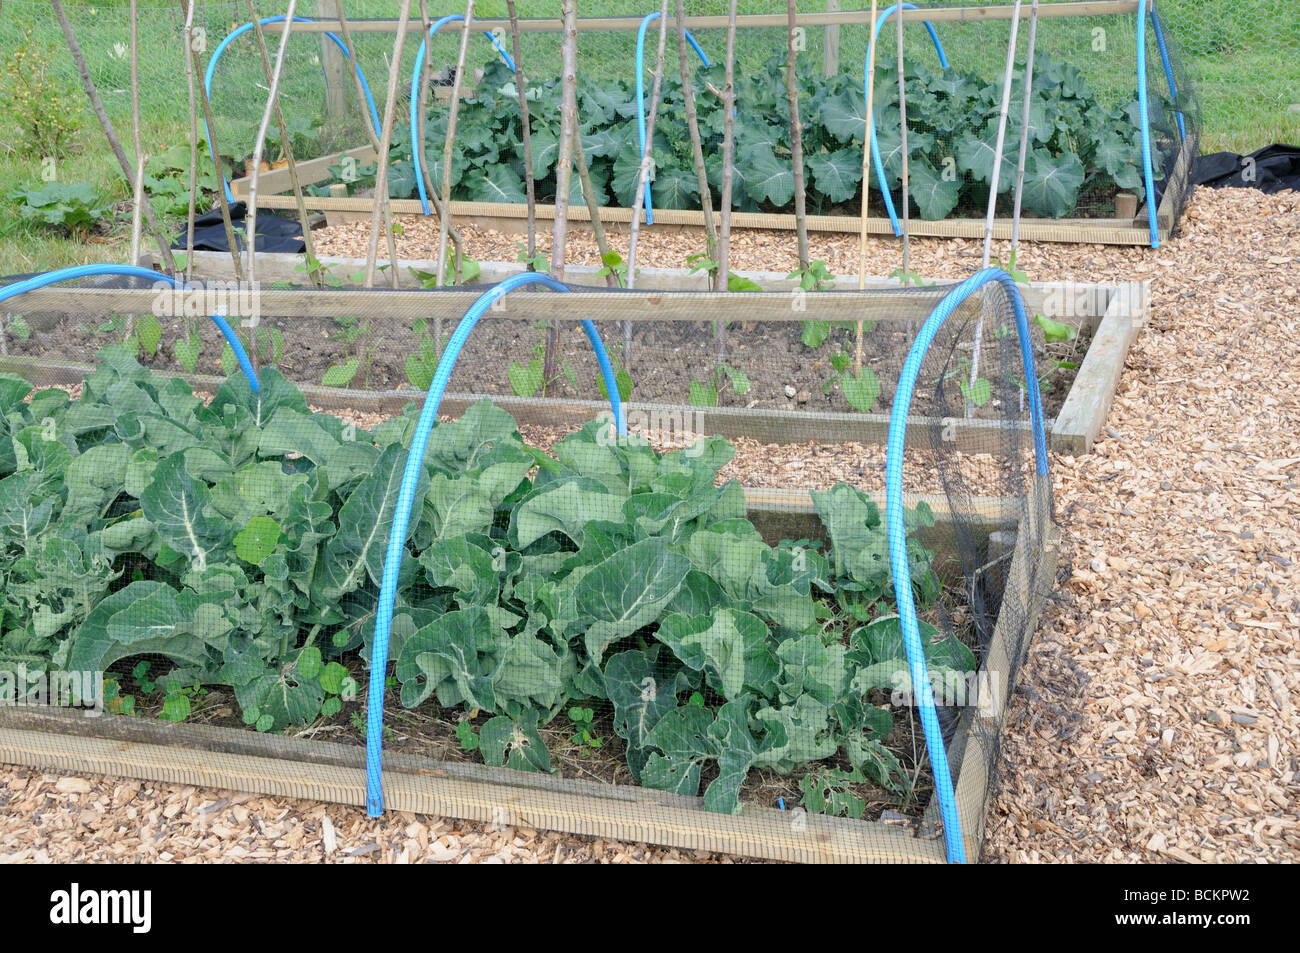 Small allotment plot with brassicas covered by netting to prevent cabbage butterfly infestation UK May Stock Photo